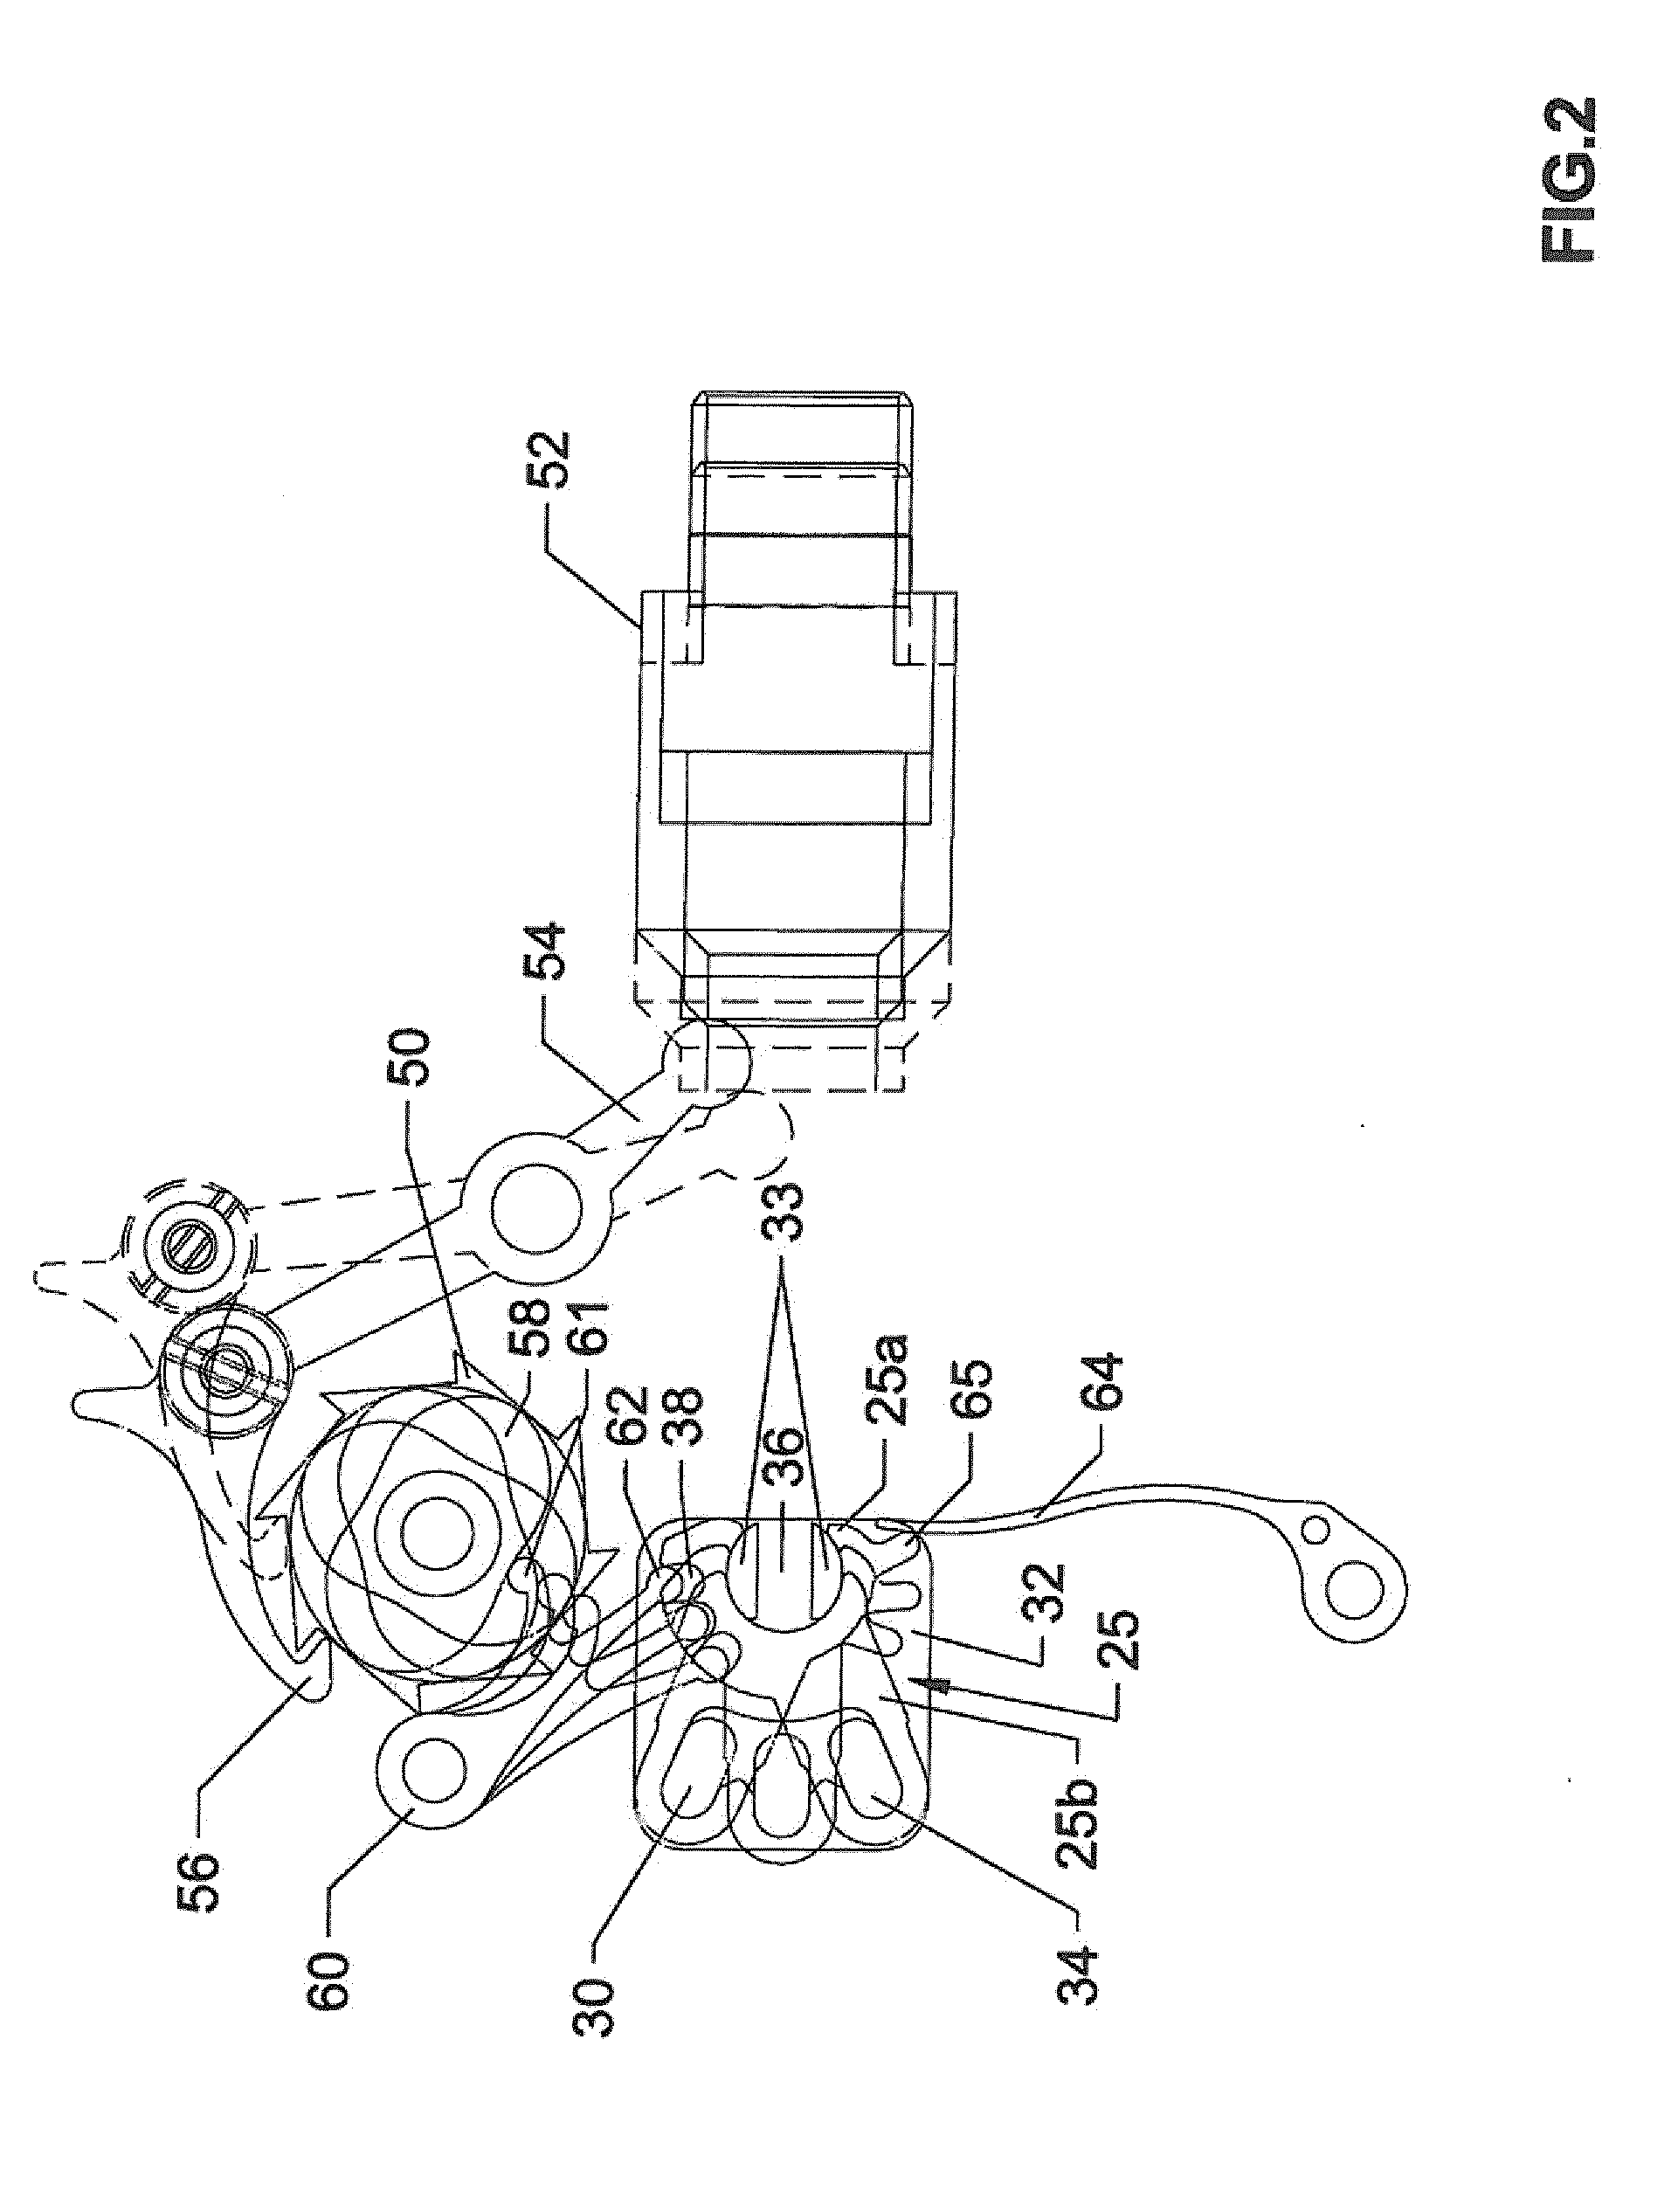 Mechanism for selecting and actuating functions of a clockwork movement